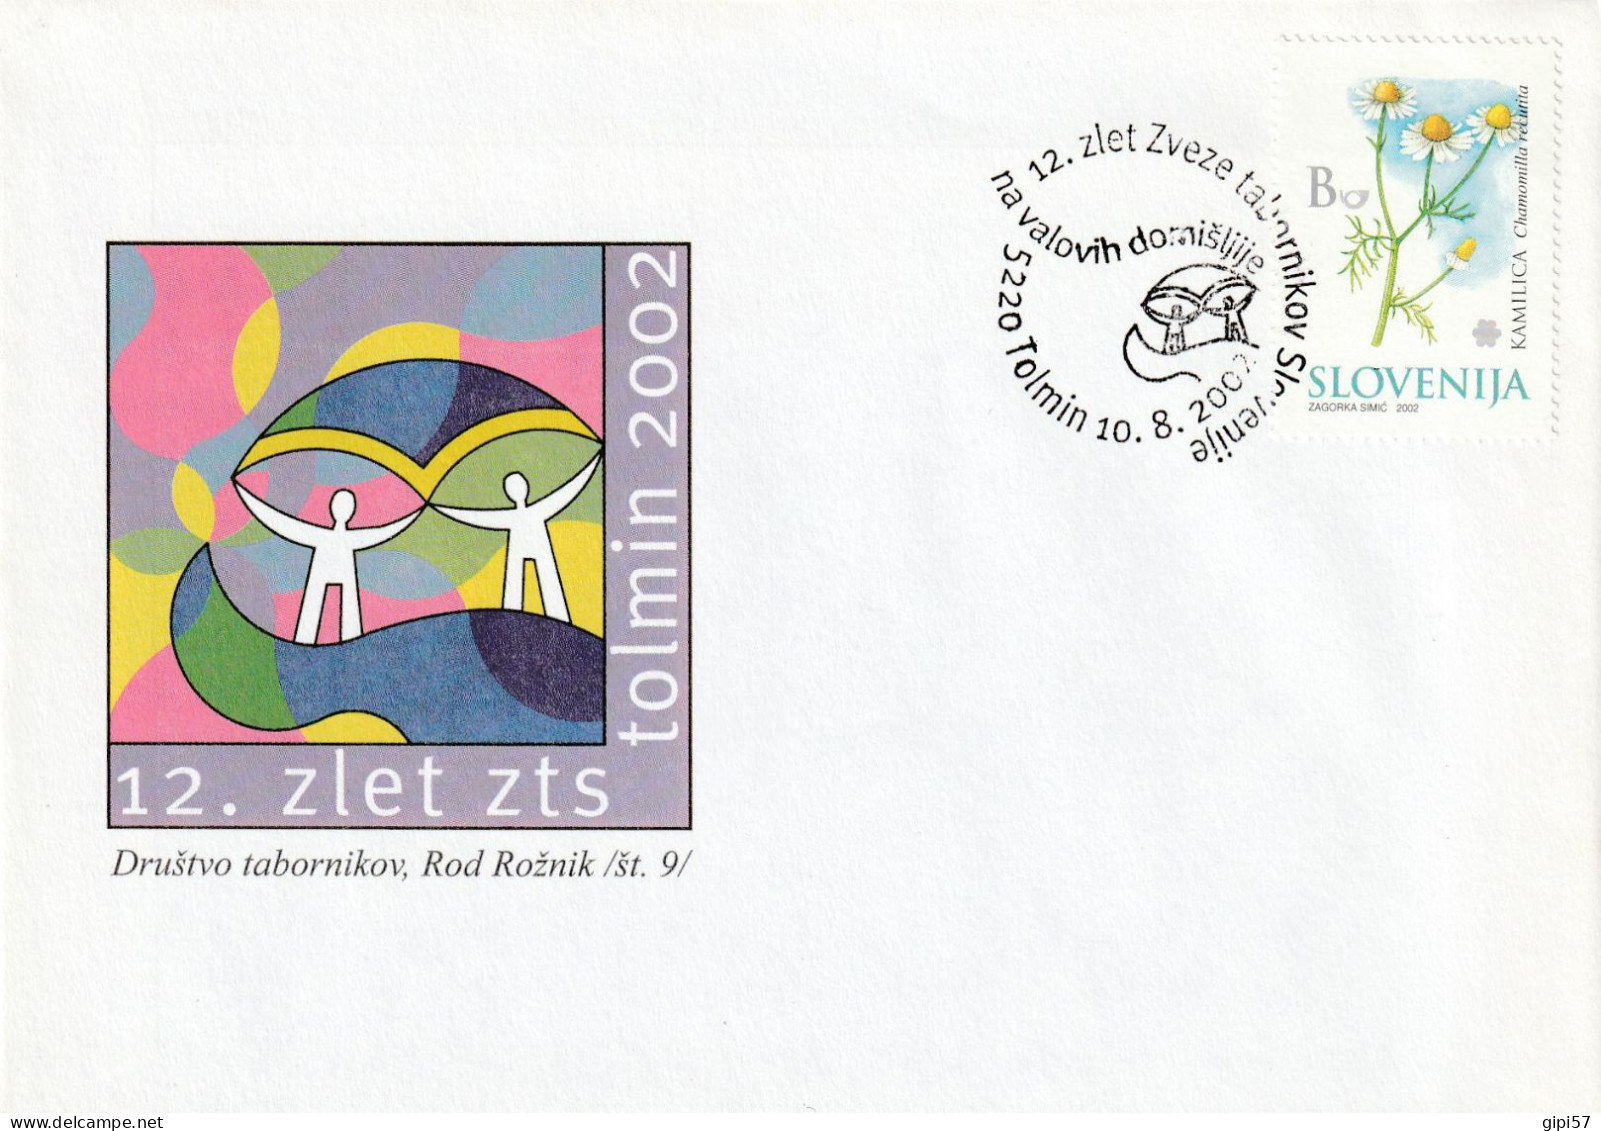 SCOUT SLOVENIA 2007 - FDC 12. FLY ON THE IMMAGINATION. SPECIAL CANCEL TOLMIN - Slowenien